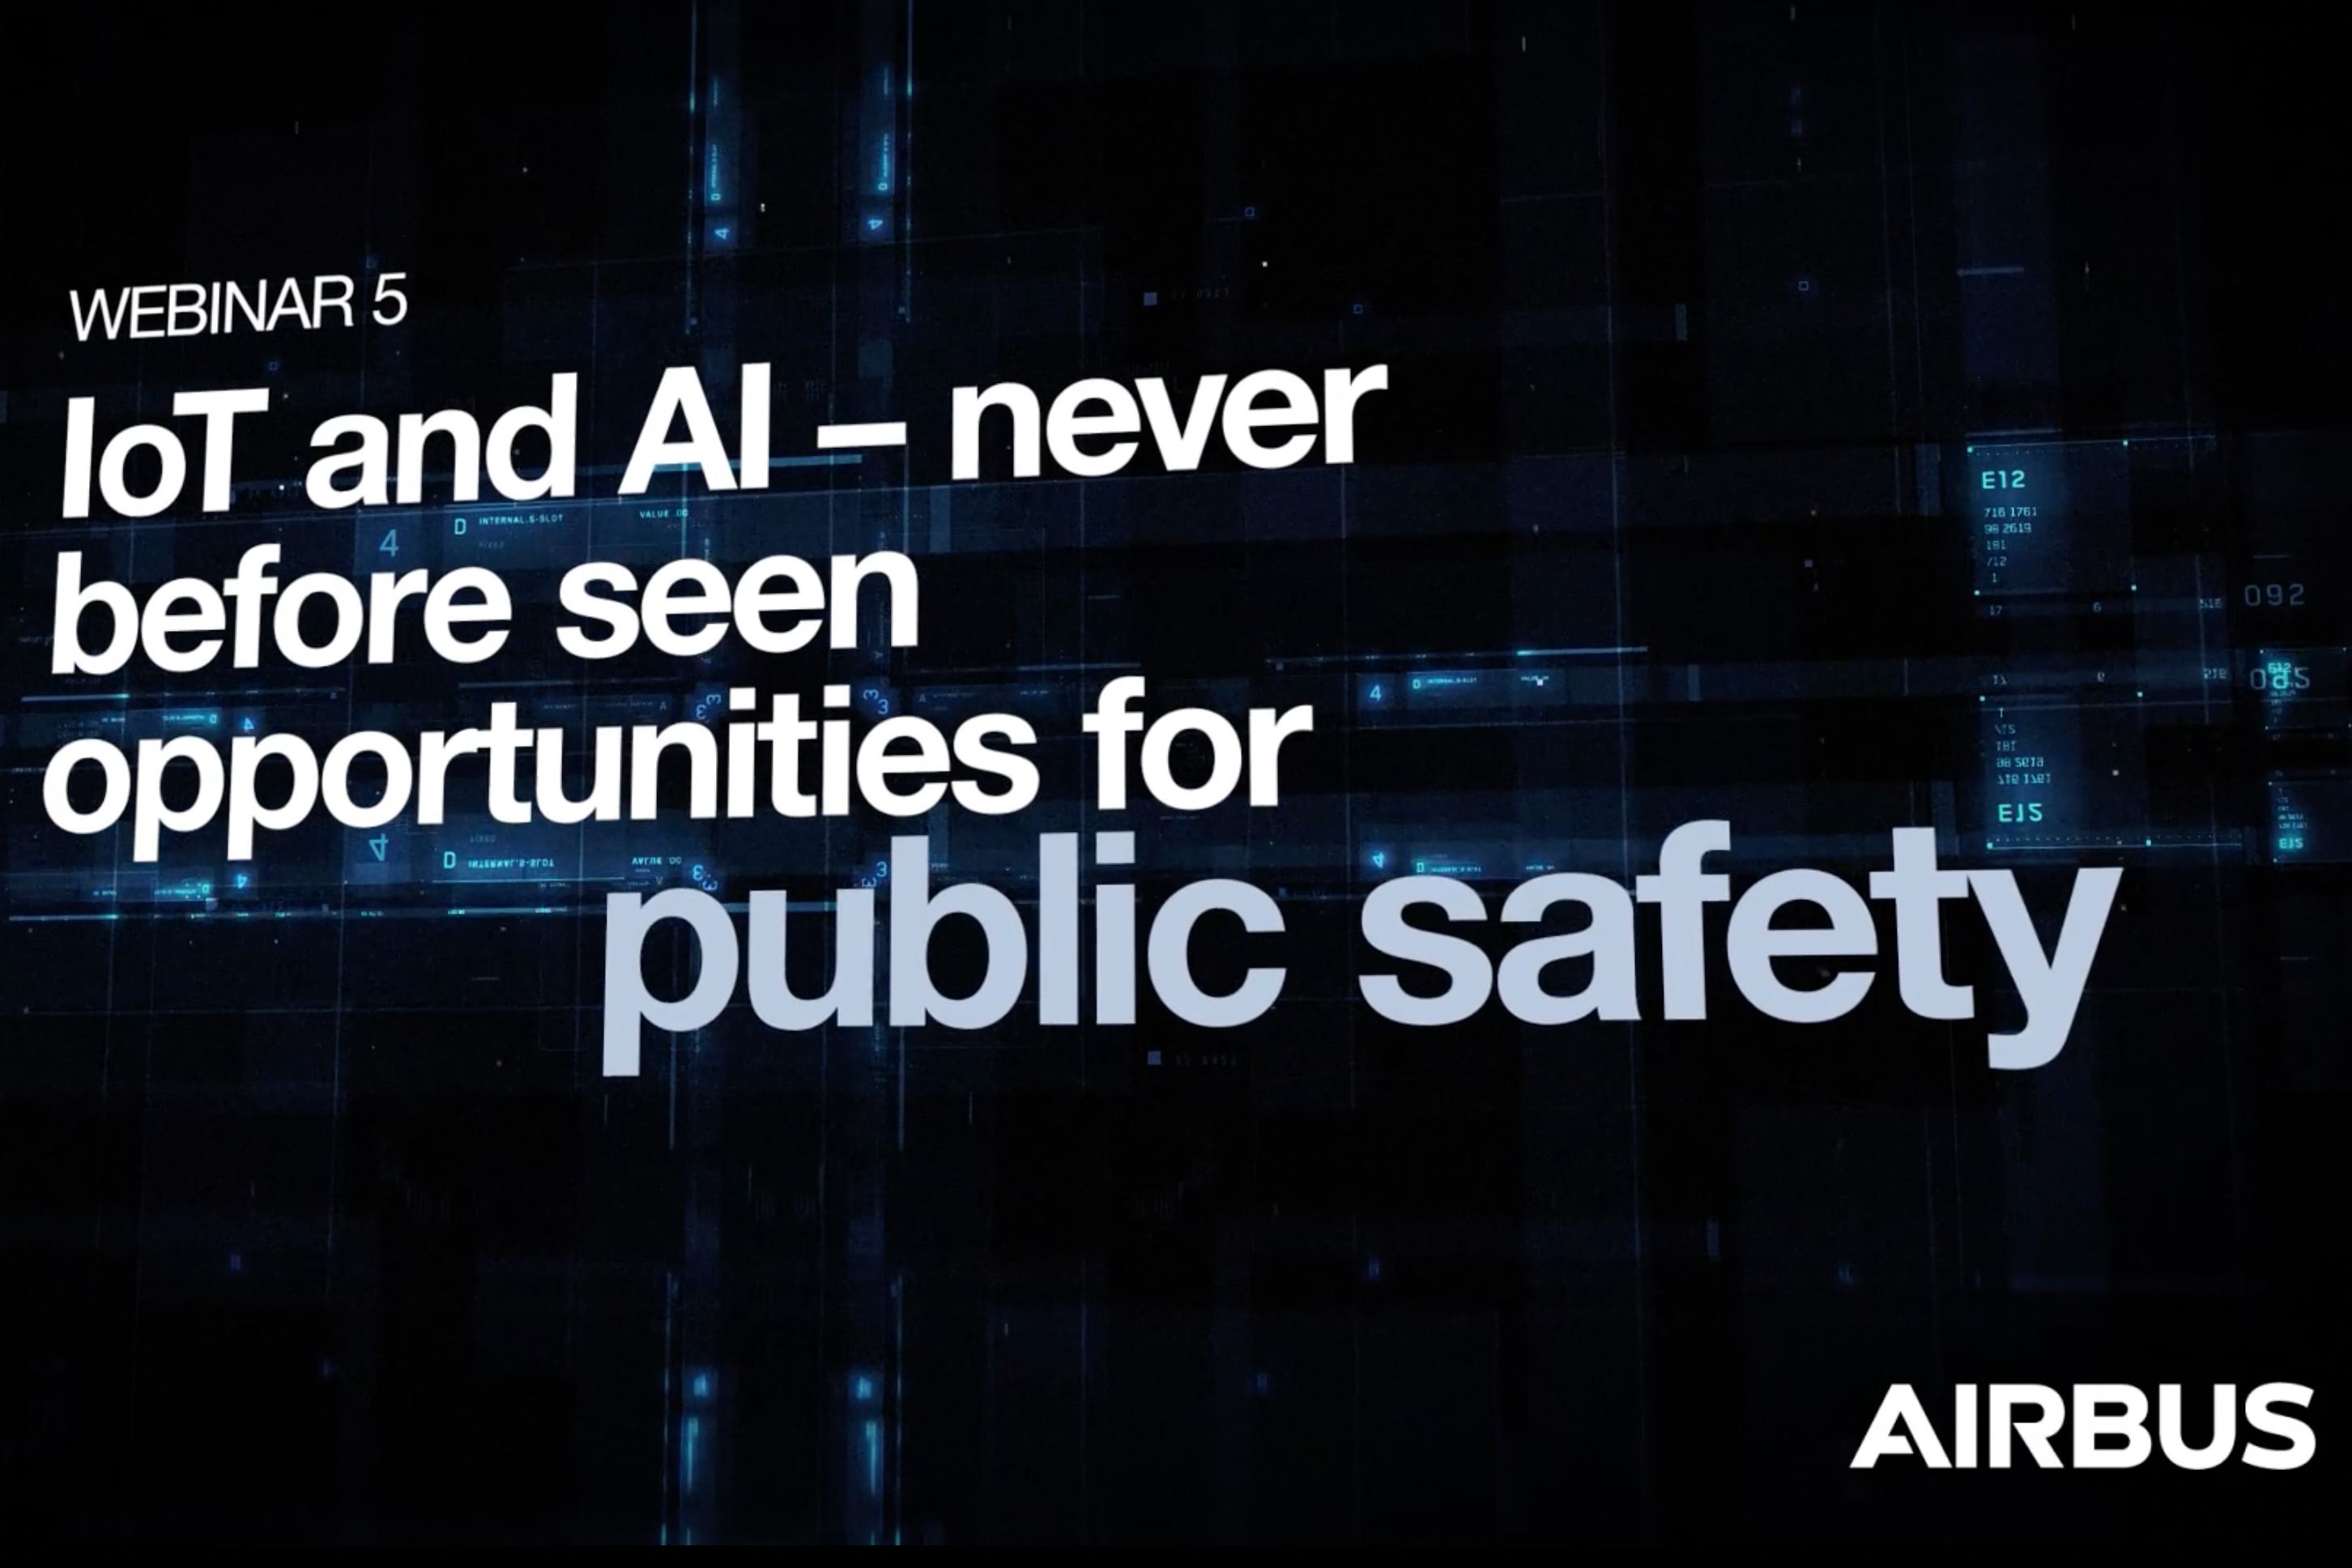 Webinar 5: IoT and AI – never before seen opportunities for public safety